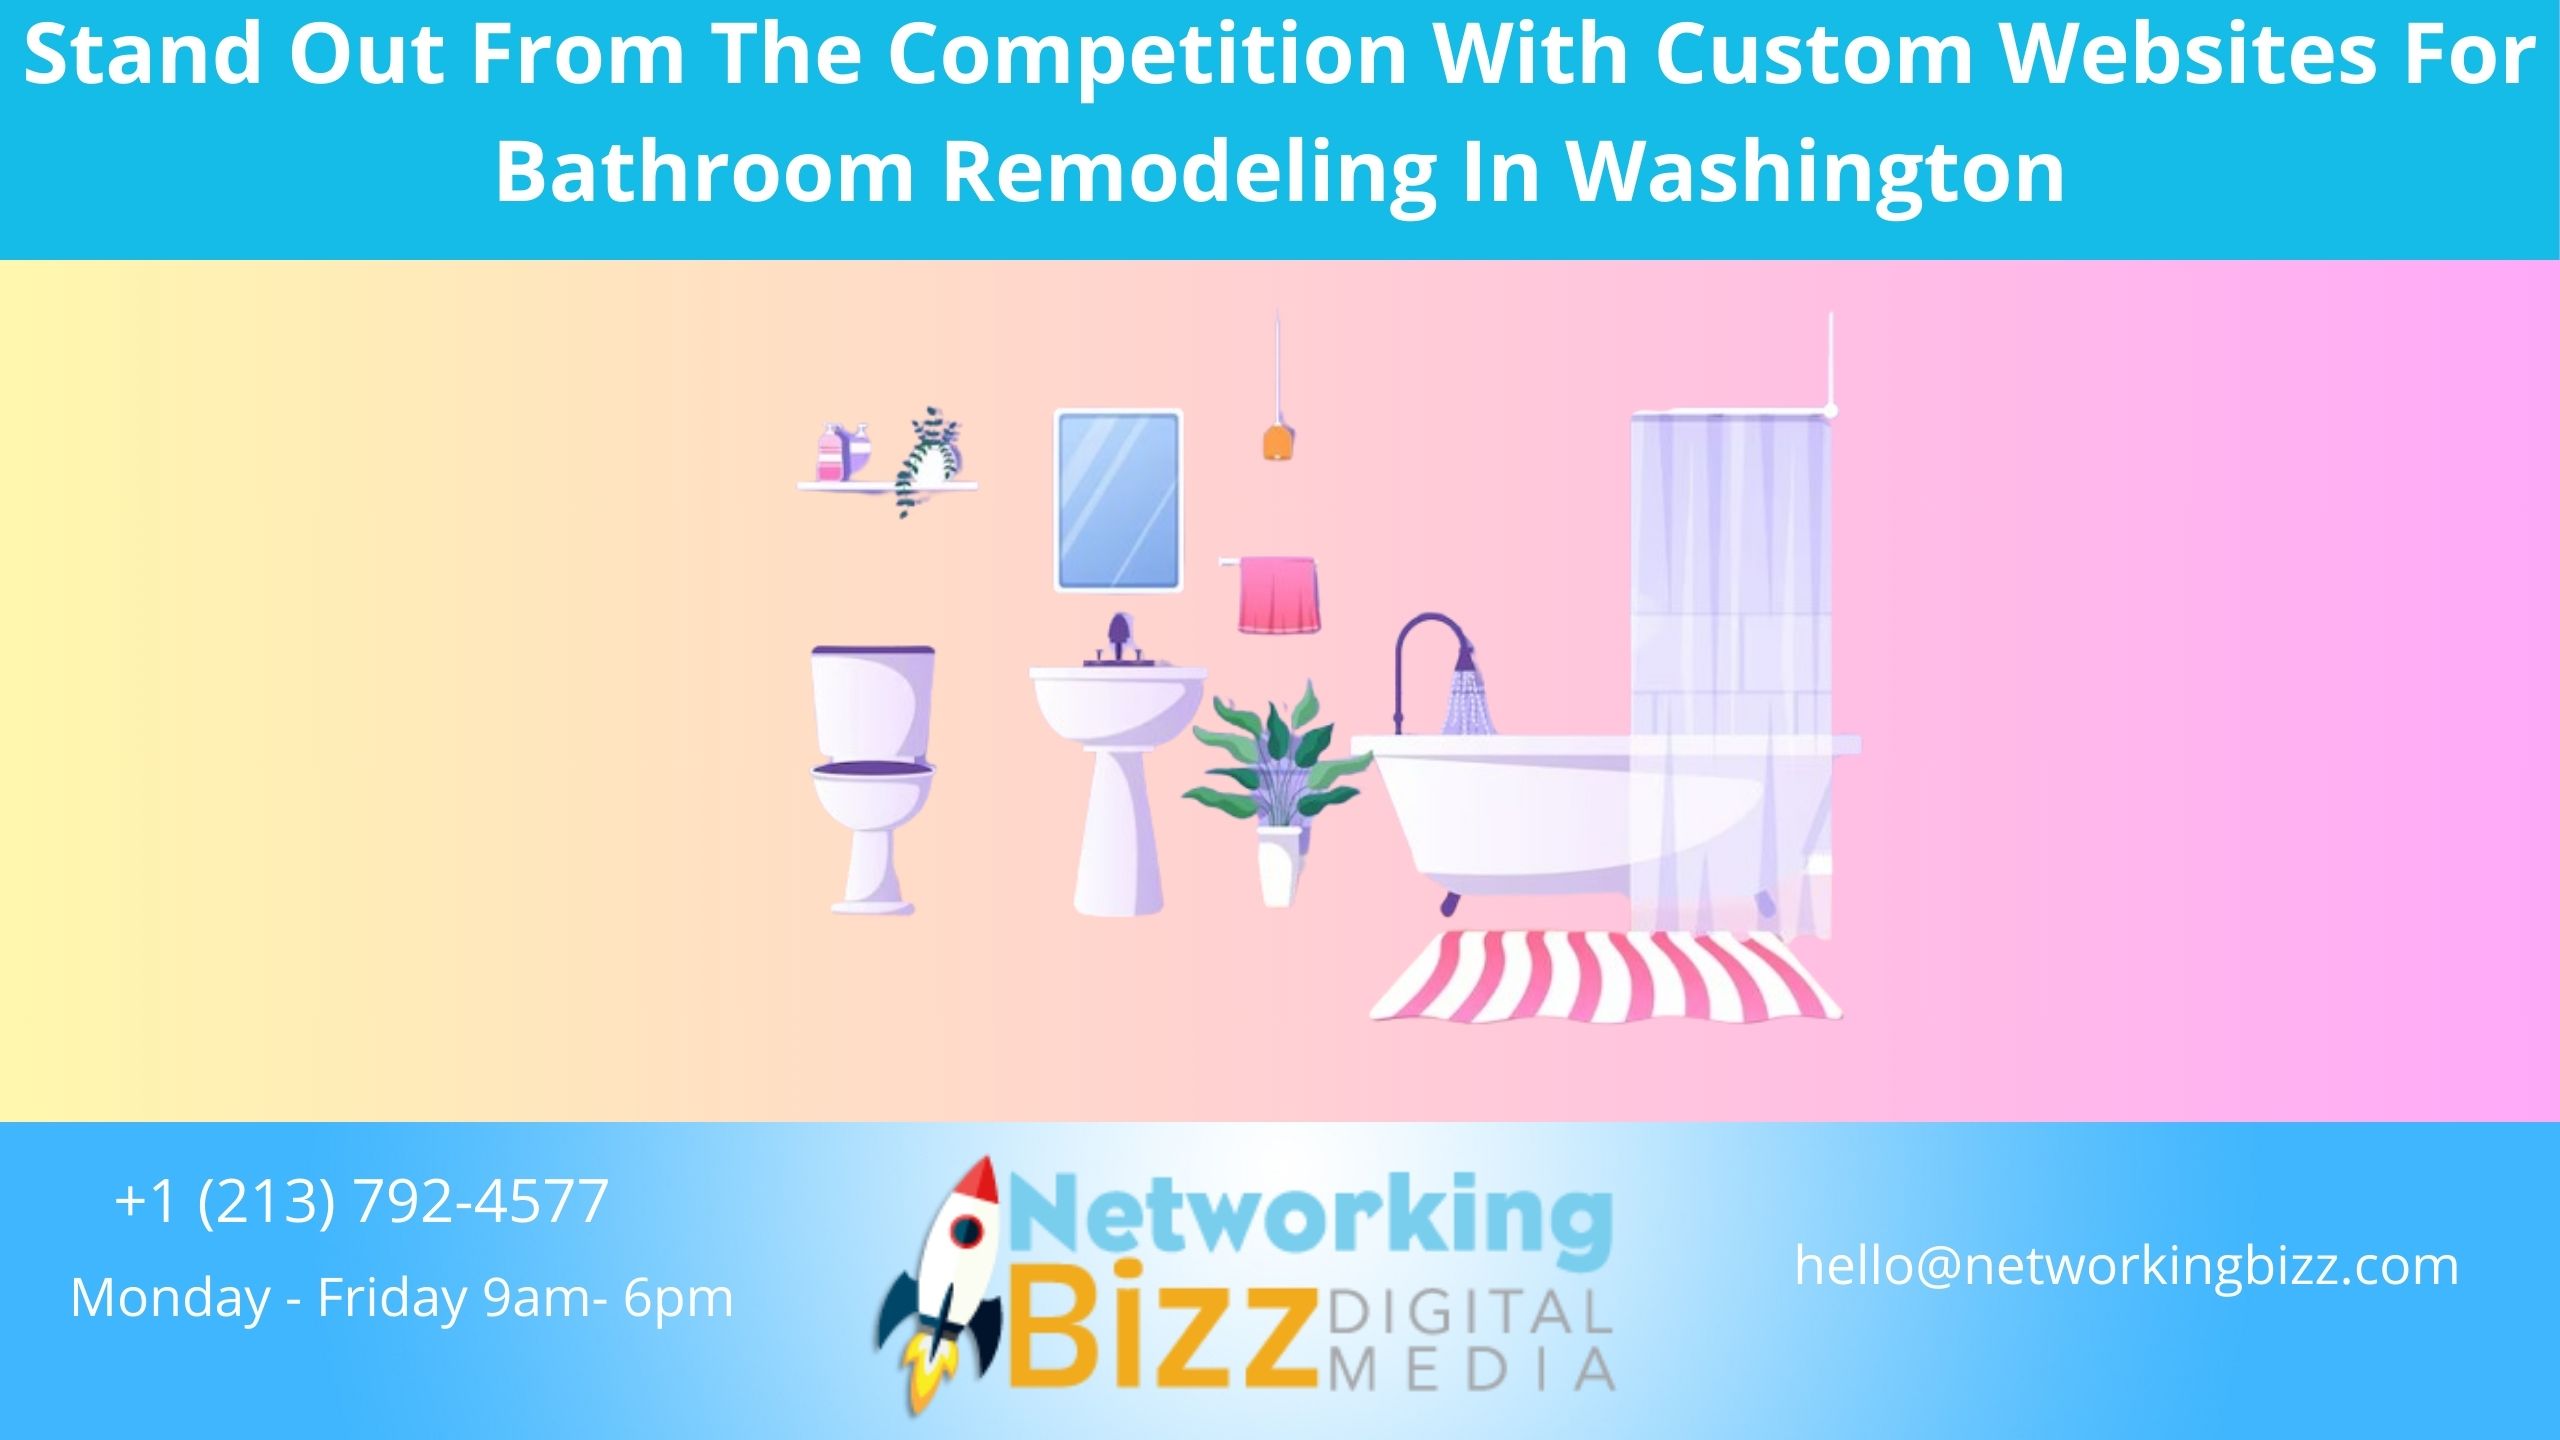 Stand Out From The Competition With Custom Websites For Bathroom Remodeling In Washington 